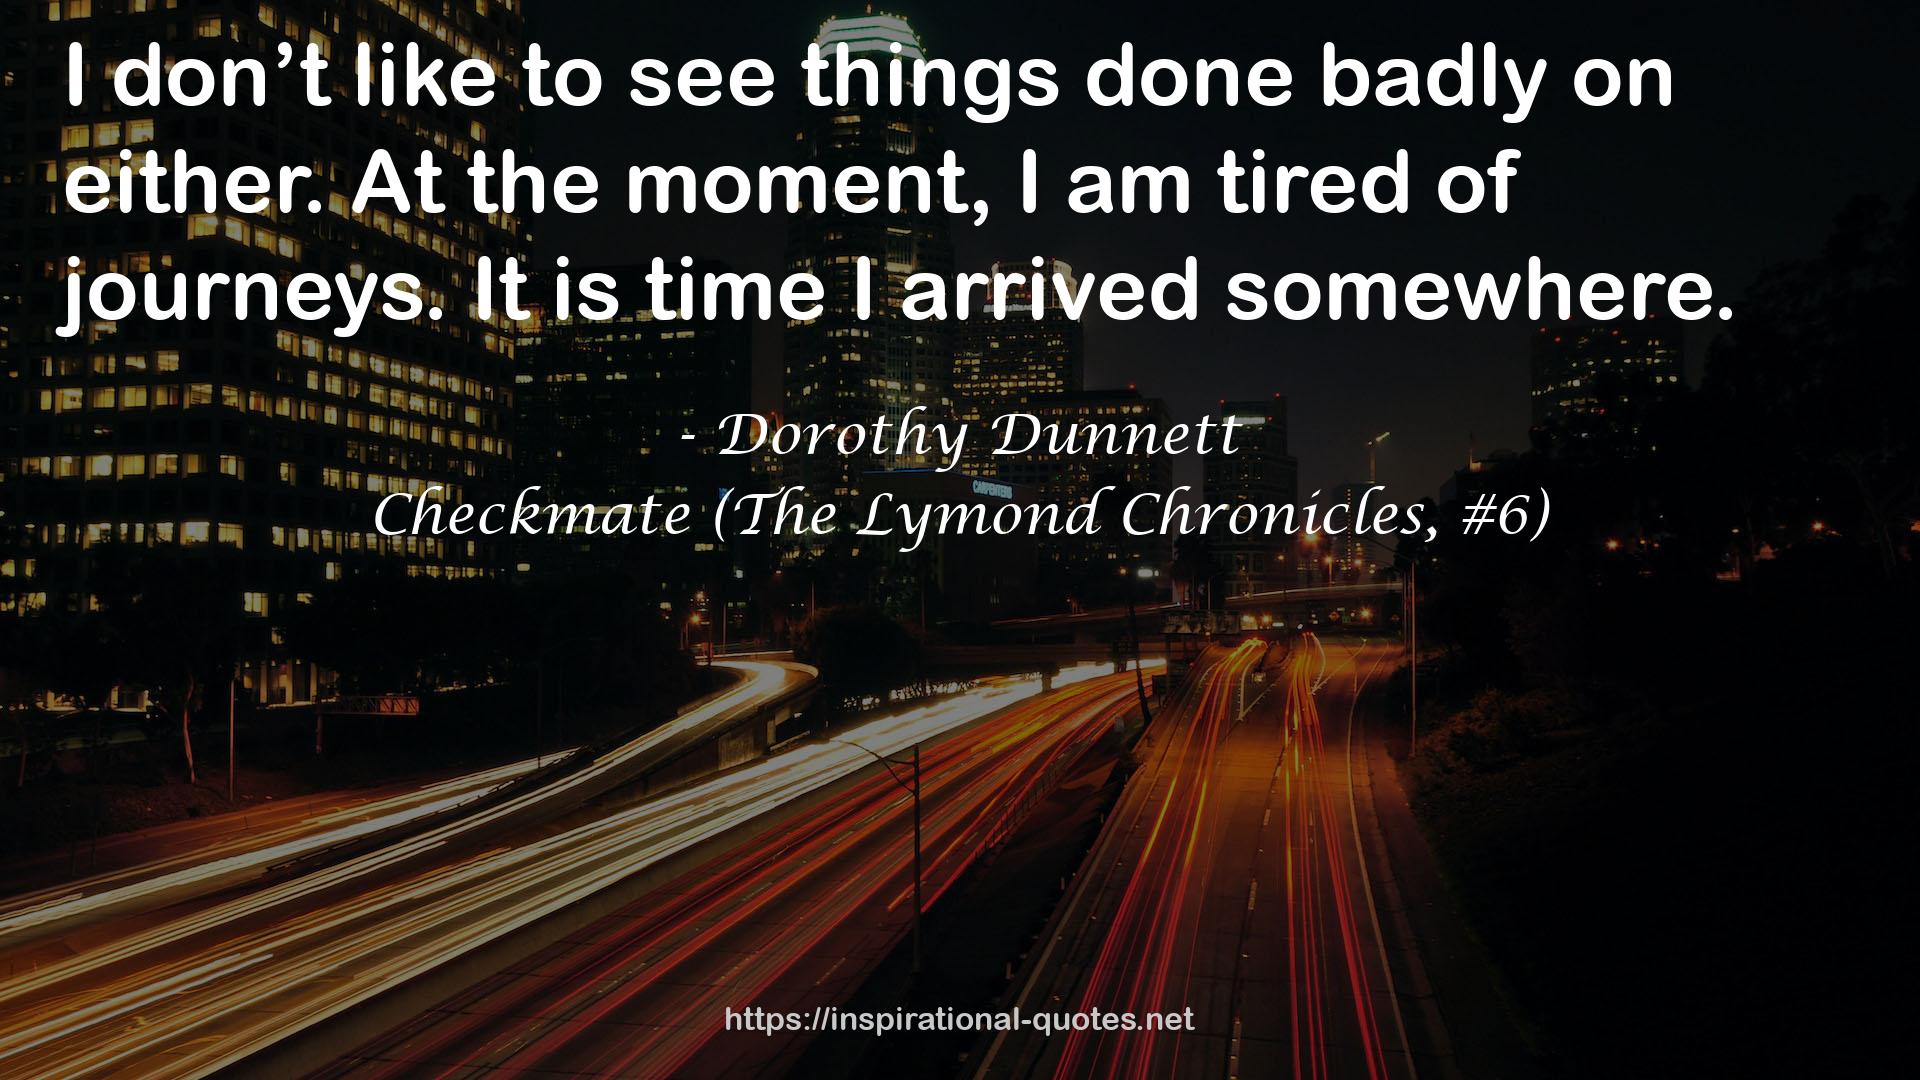 Checkmate (The Lymond Chronicles, #6) QUOTES